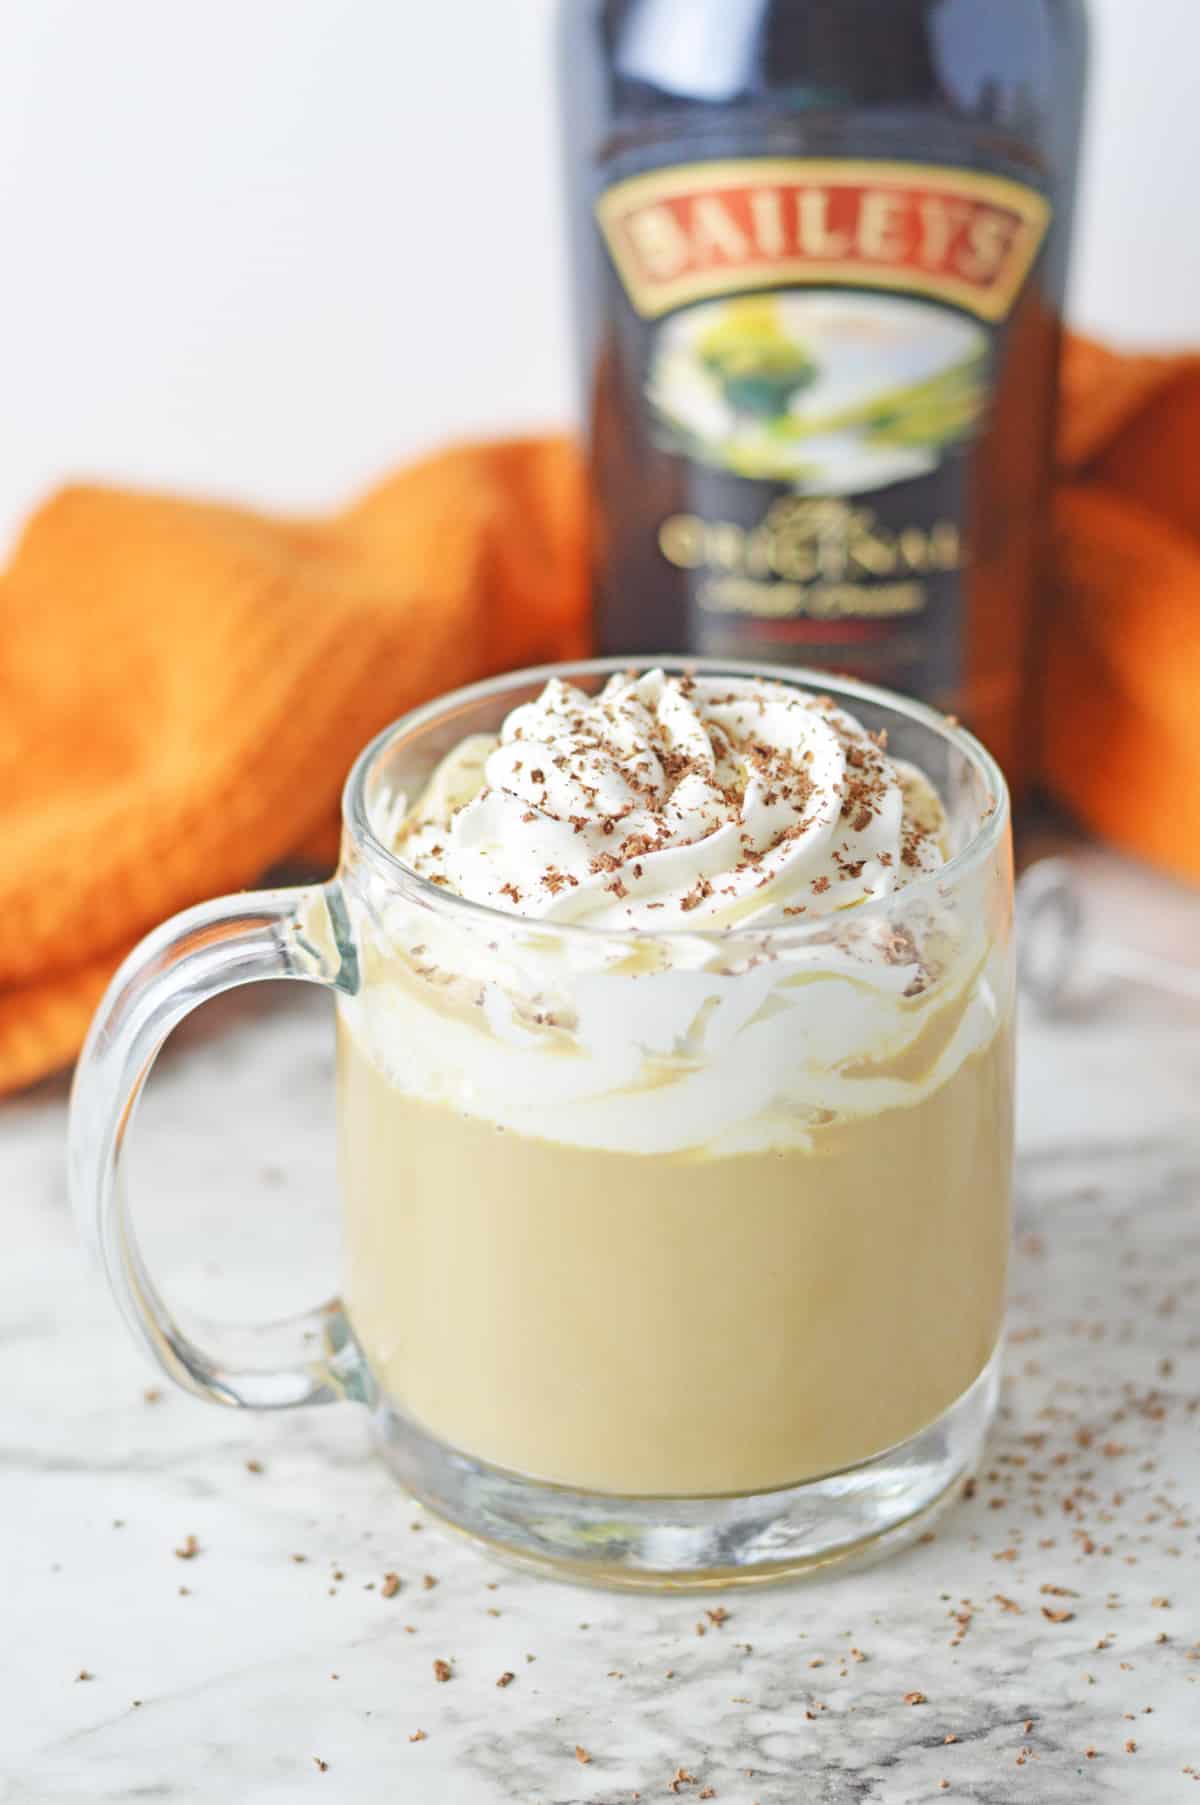 Baileys latte with whipped cream in a glass mug.